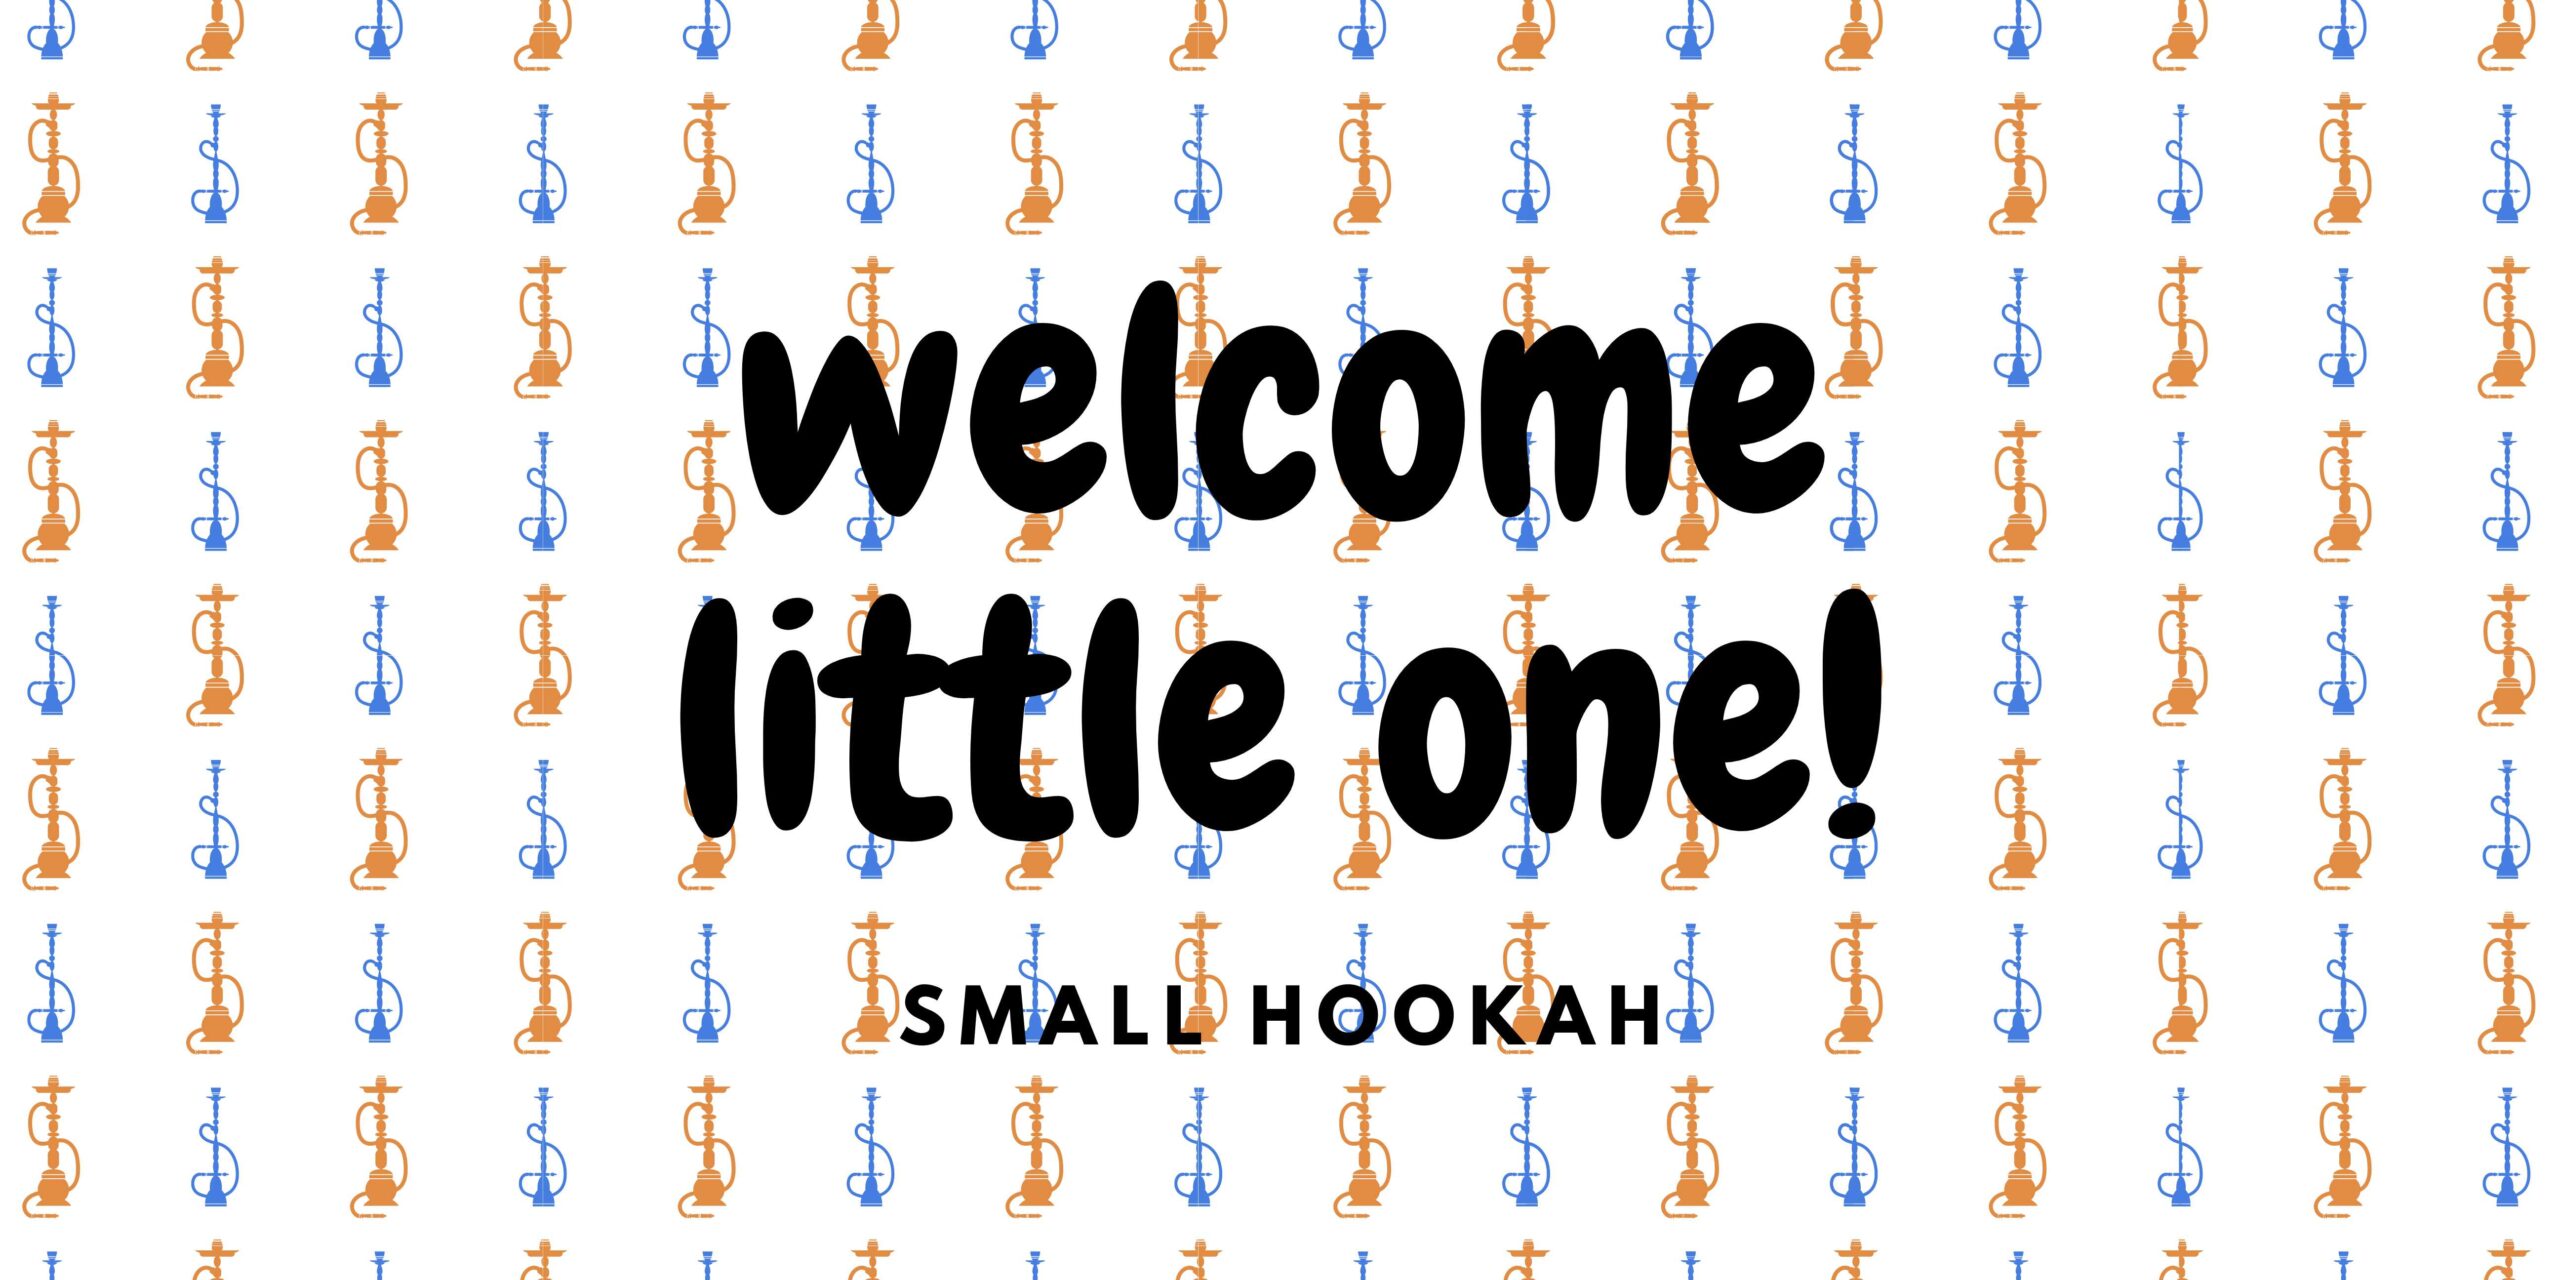 image is showing small hookah graphics at the back ground and a funny statement in the center of the image saying Welcome little one. small hookah